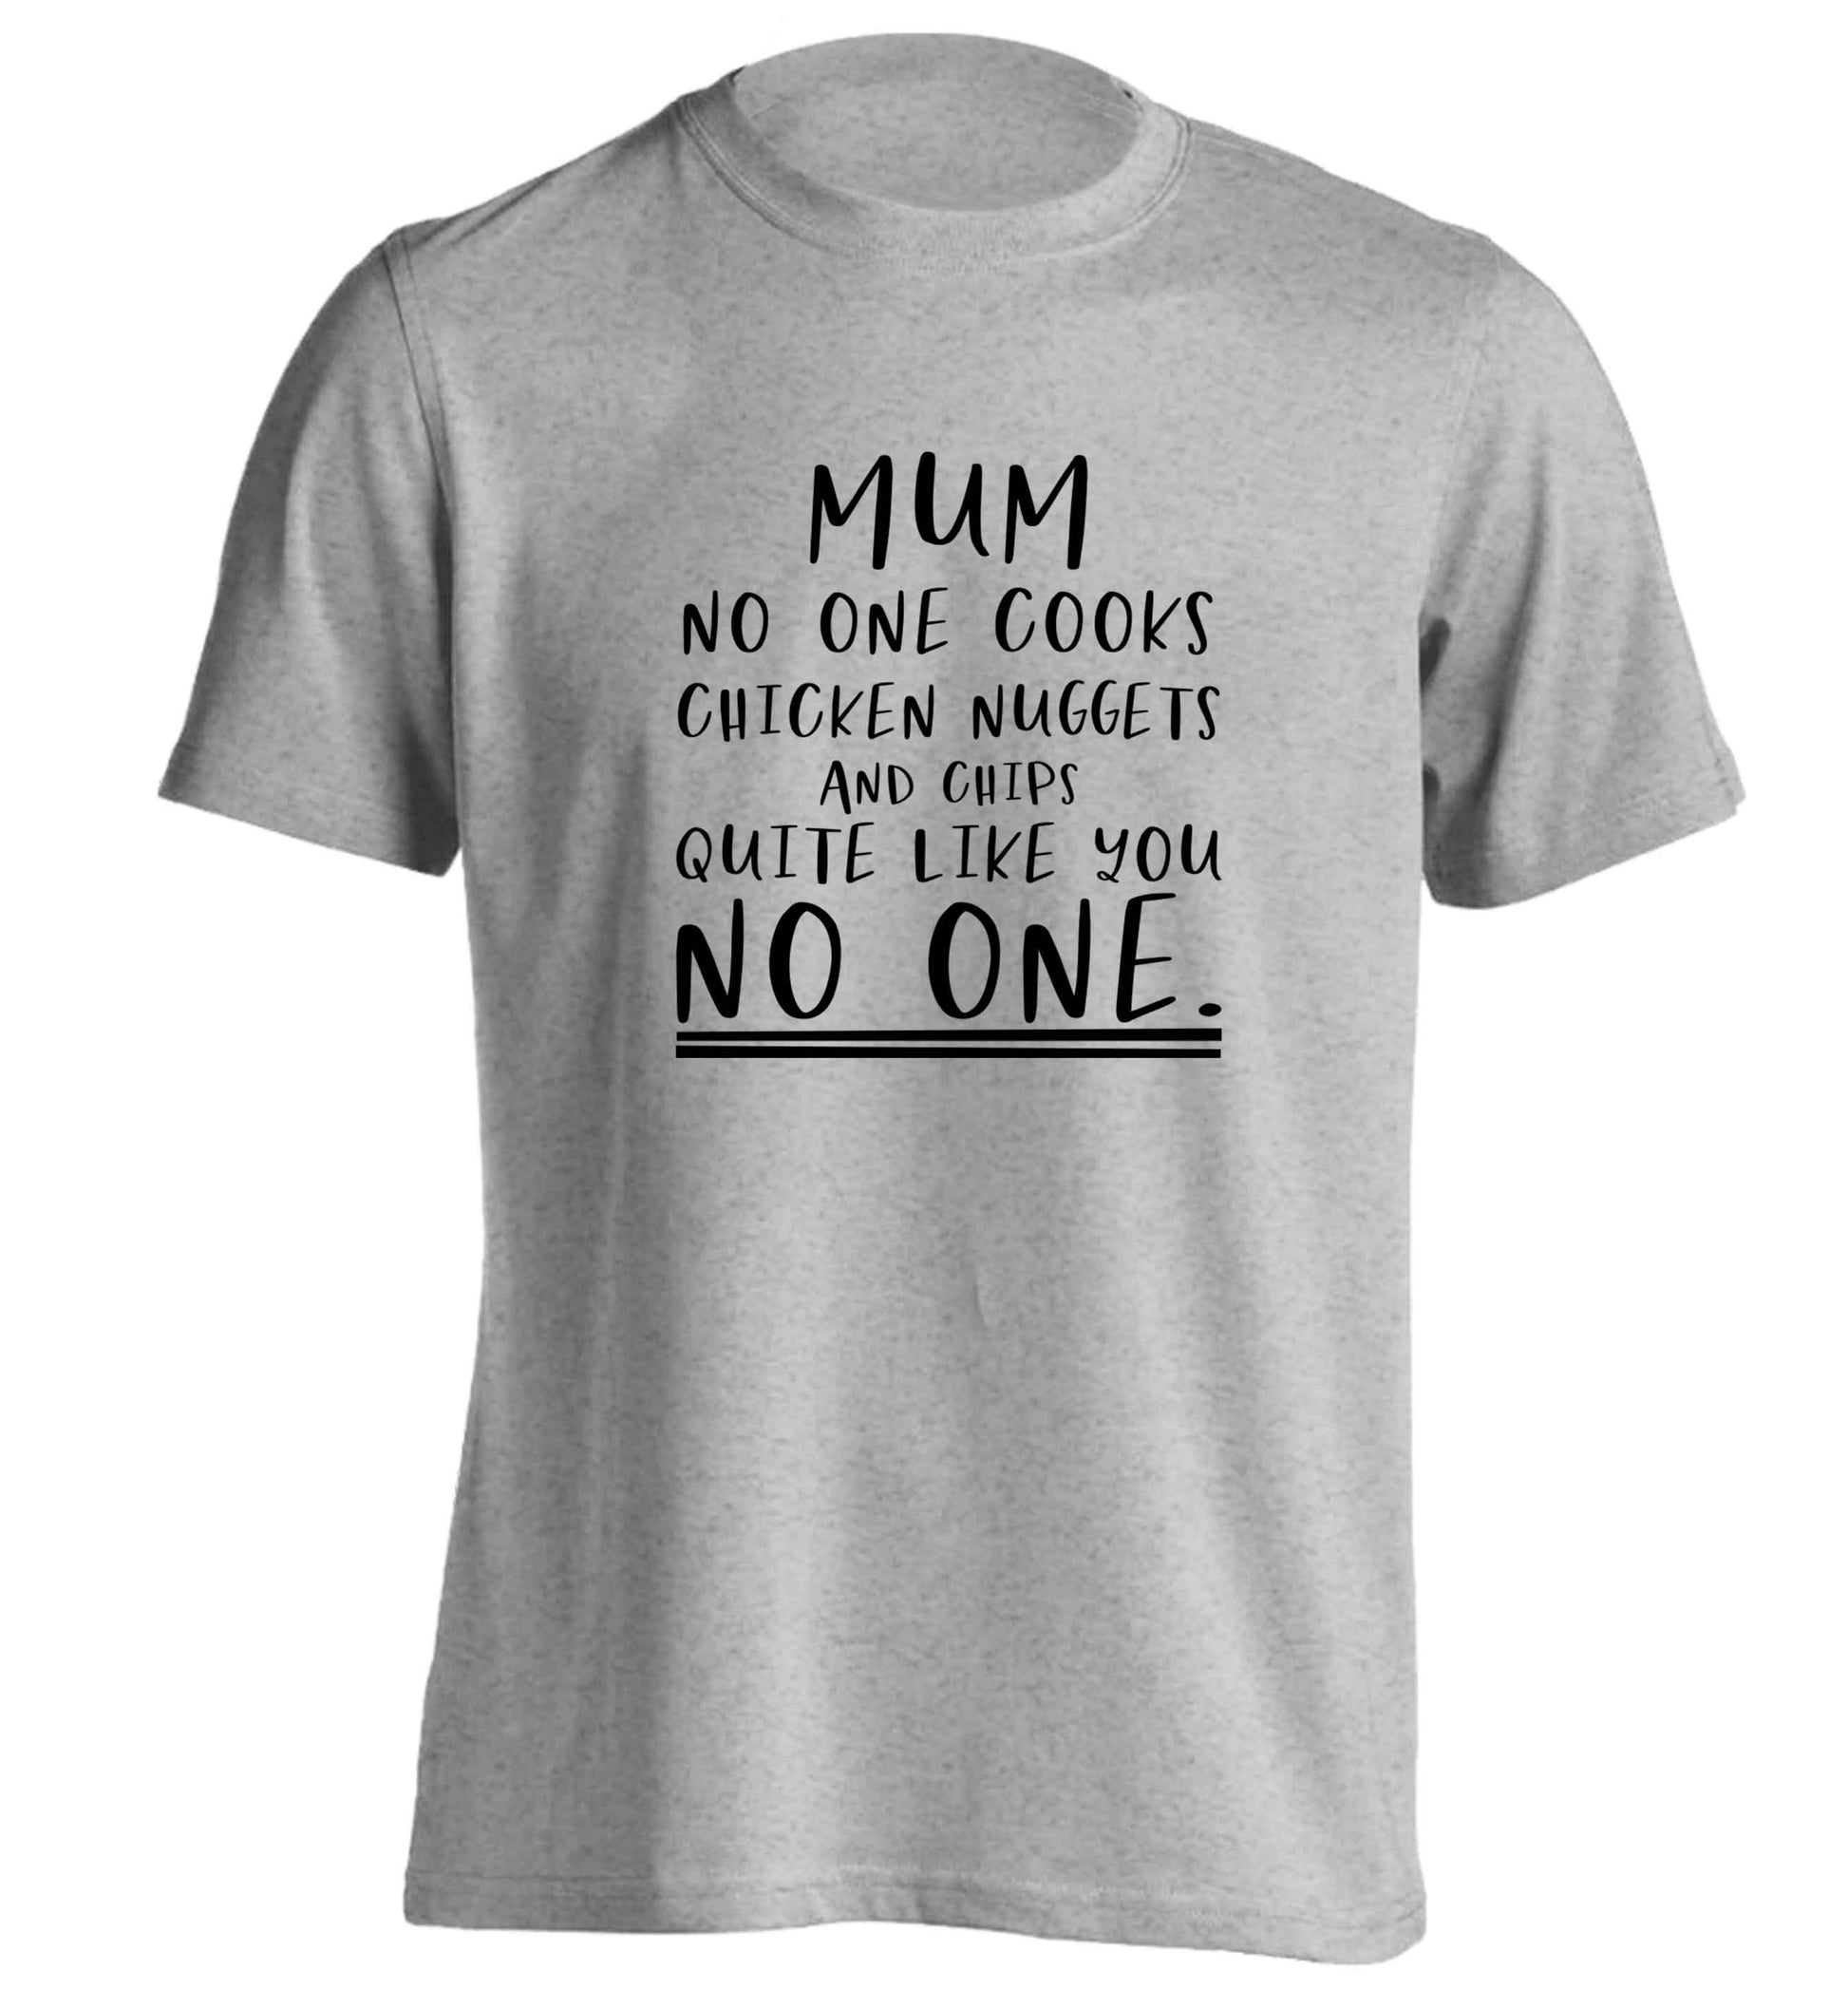 Super funny sassy gift for mother's day or birthday!  Mum no one cooks chicken nuggets and chips like you no one adults unisex grey Tshirt 2XL